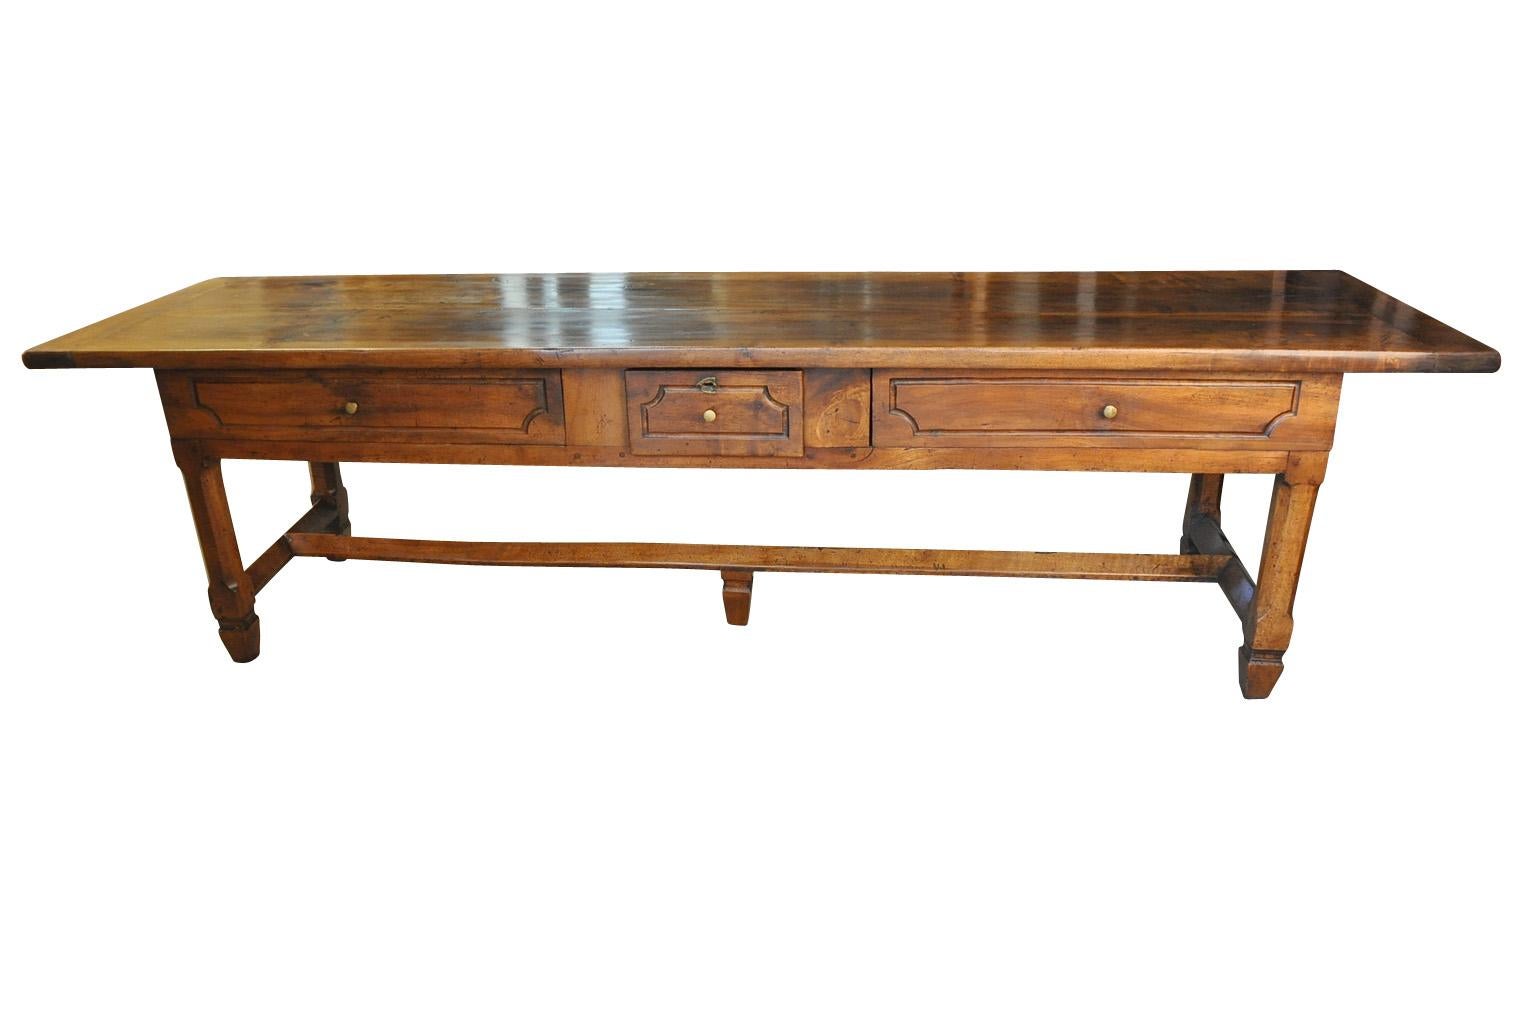 A very handsome French 18th century grand scale console table. This wonderful piece is constructed from beautiful walnut with a single drawer and 2 sliding panels with bronze pulls and wonderfully sculpted legs. Terrific patina and graining - rich